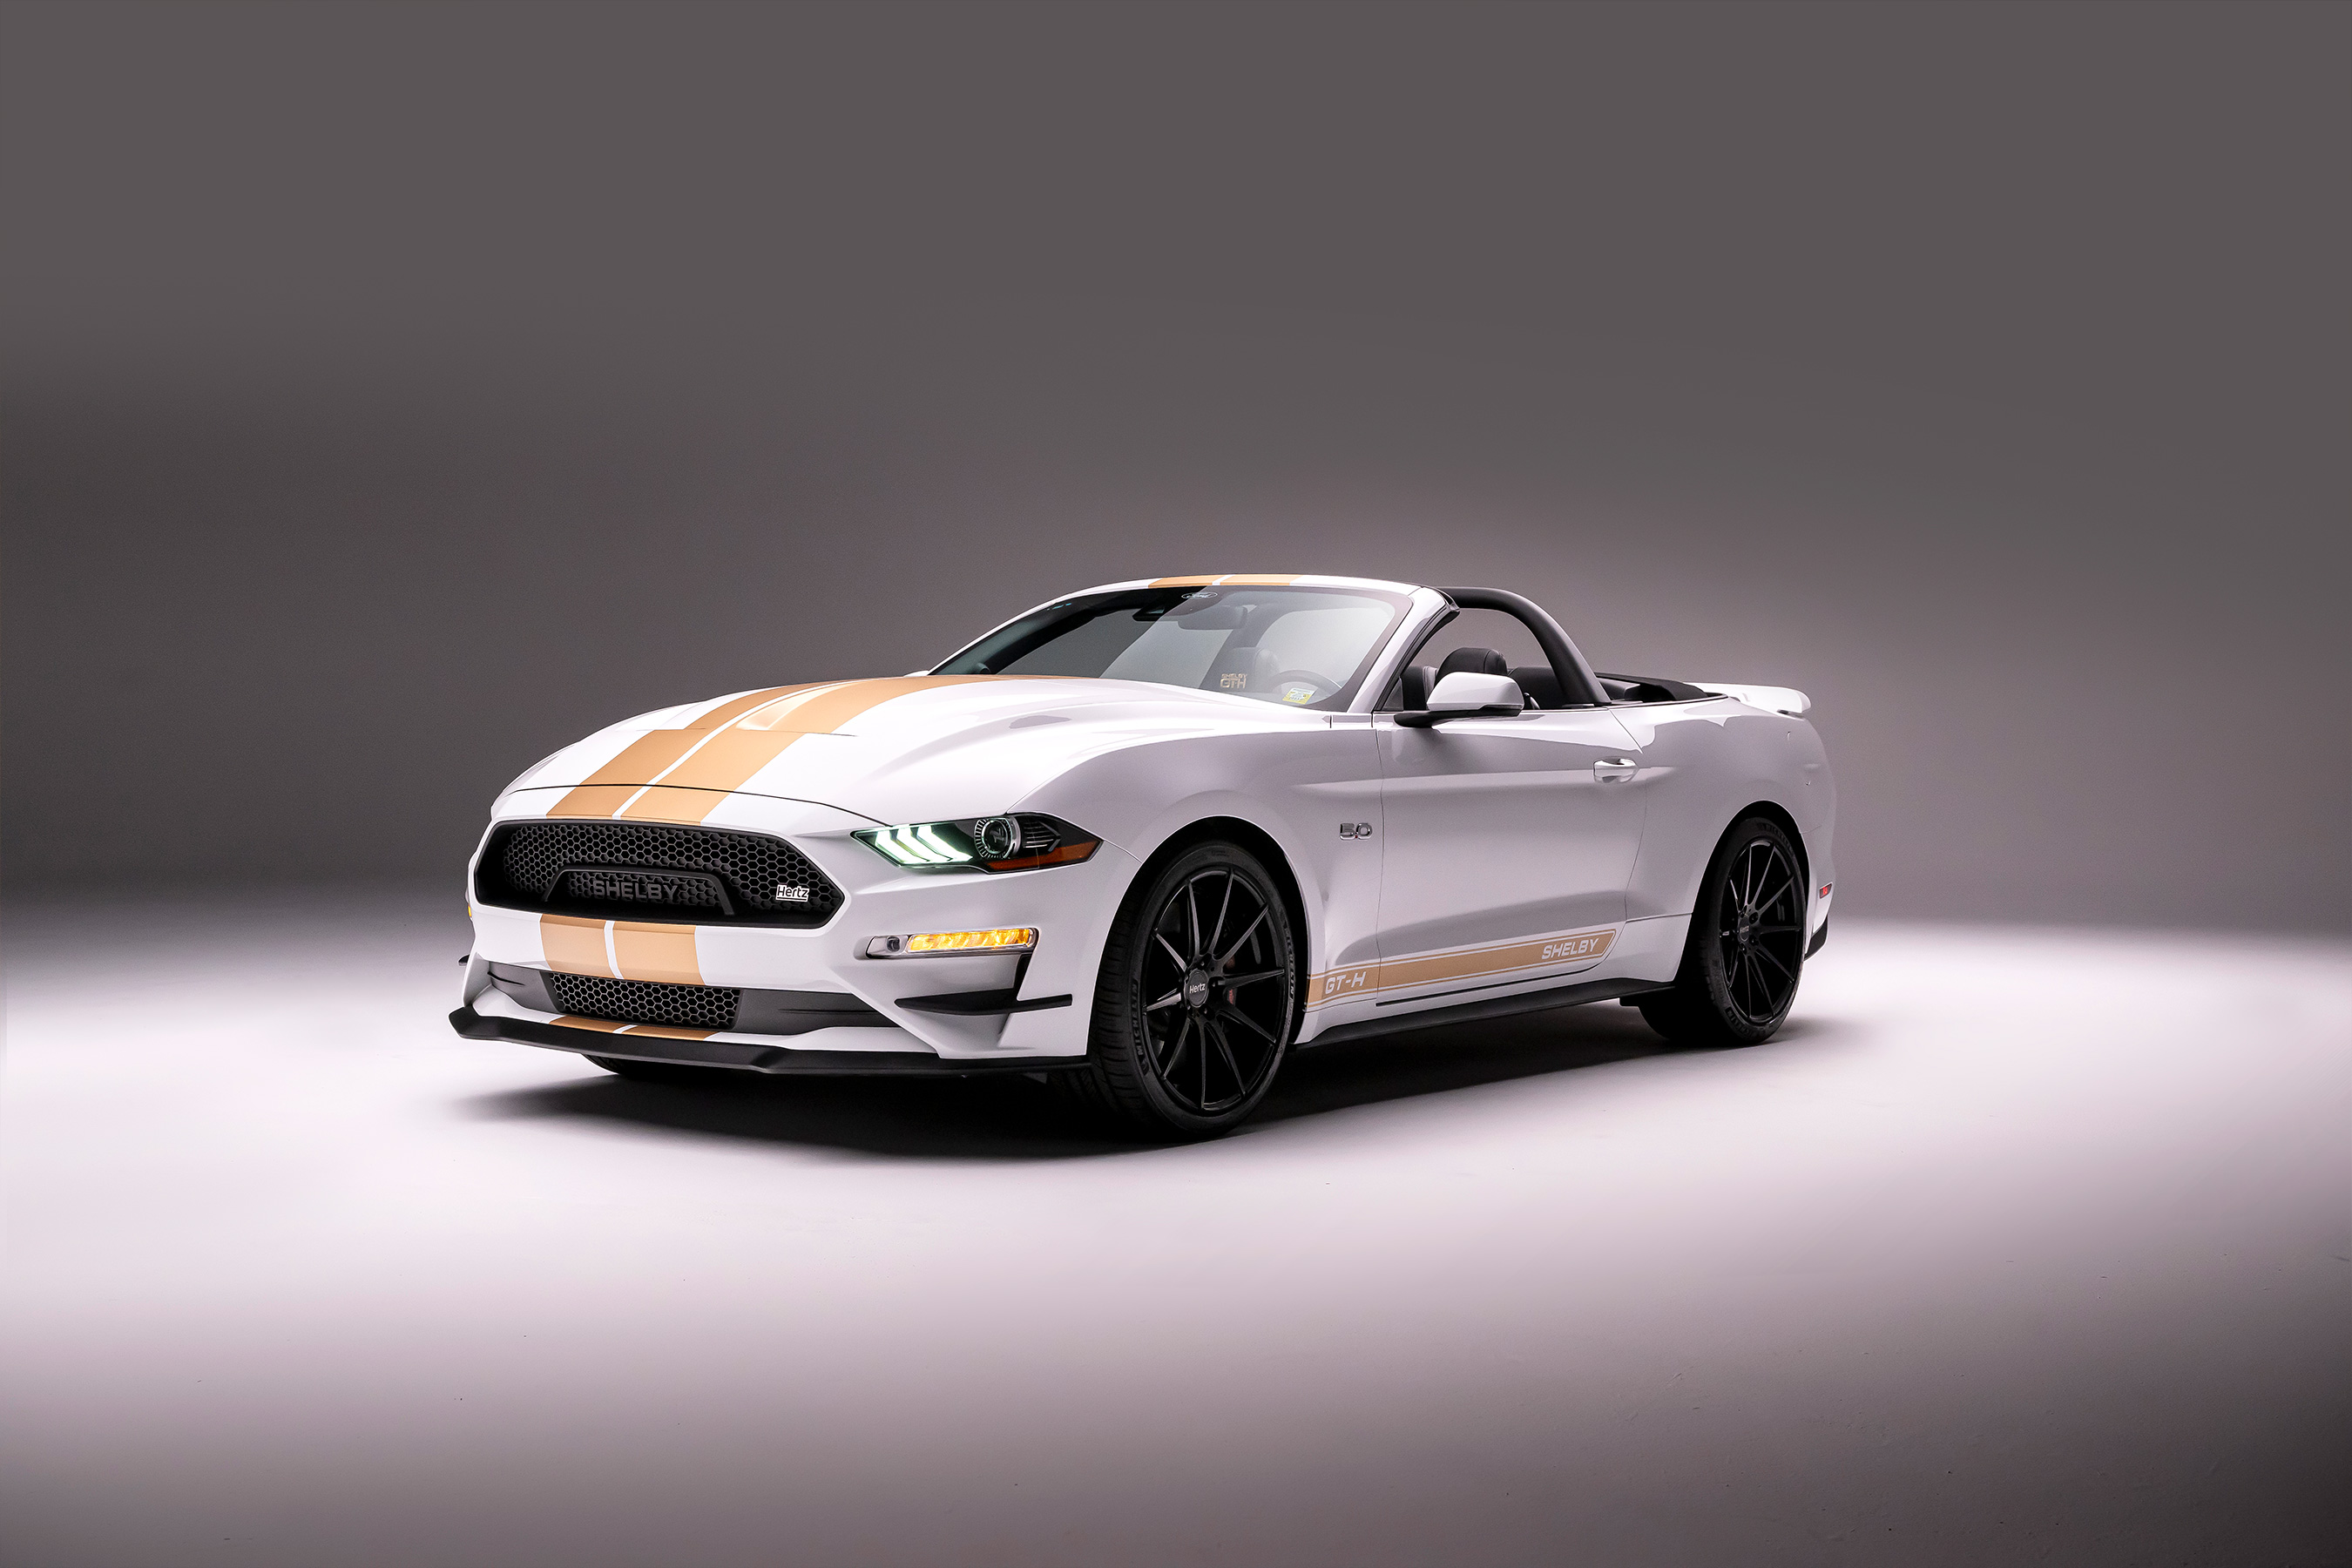 The collection also includes Mustang Shelby GT-H fastbacks and convertibles, each complete with Borla cat-back performance exhaust for the 5.0L V8, and a staggered wheel kit.